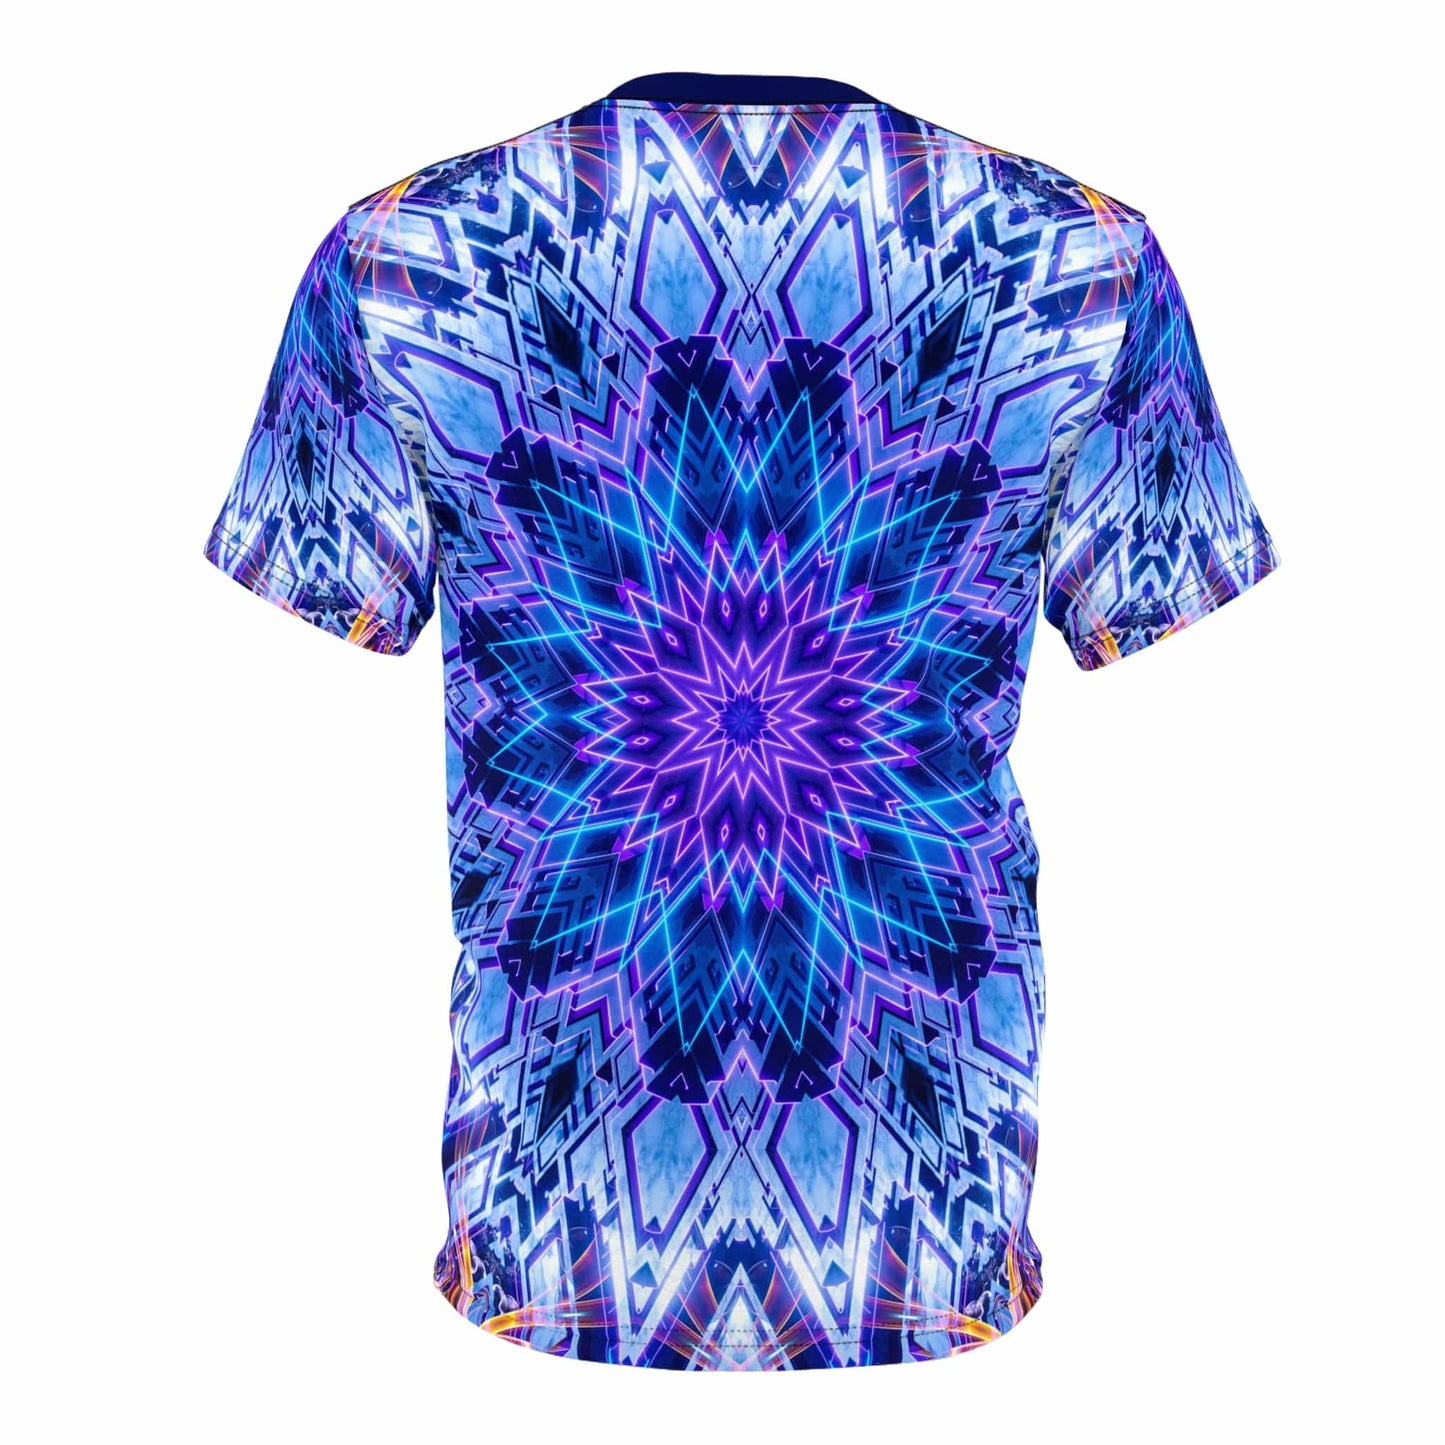 "Space Oasis" Unisex ALL OVER PRINT TEE